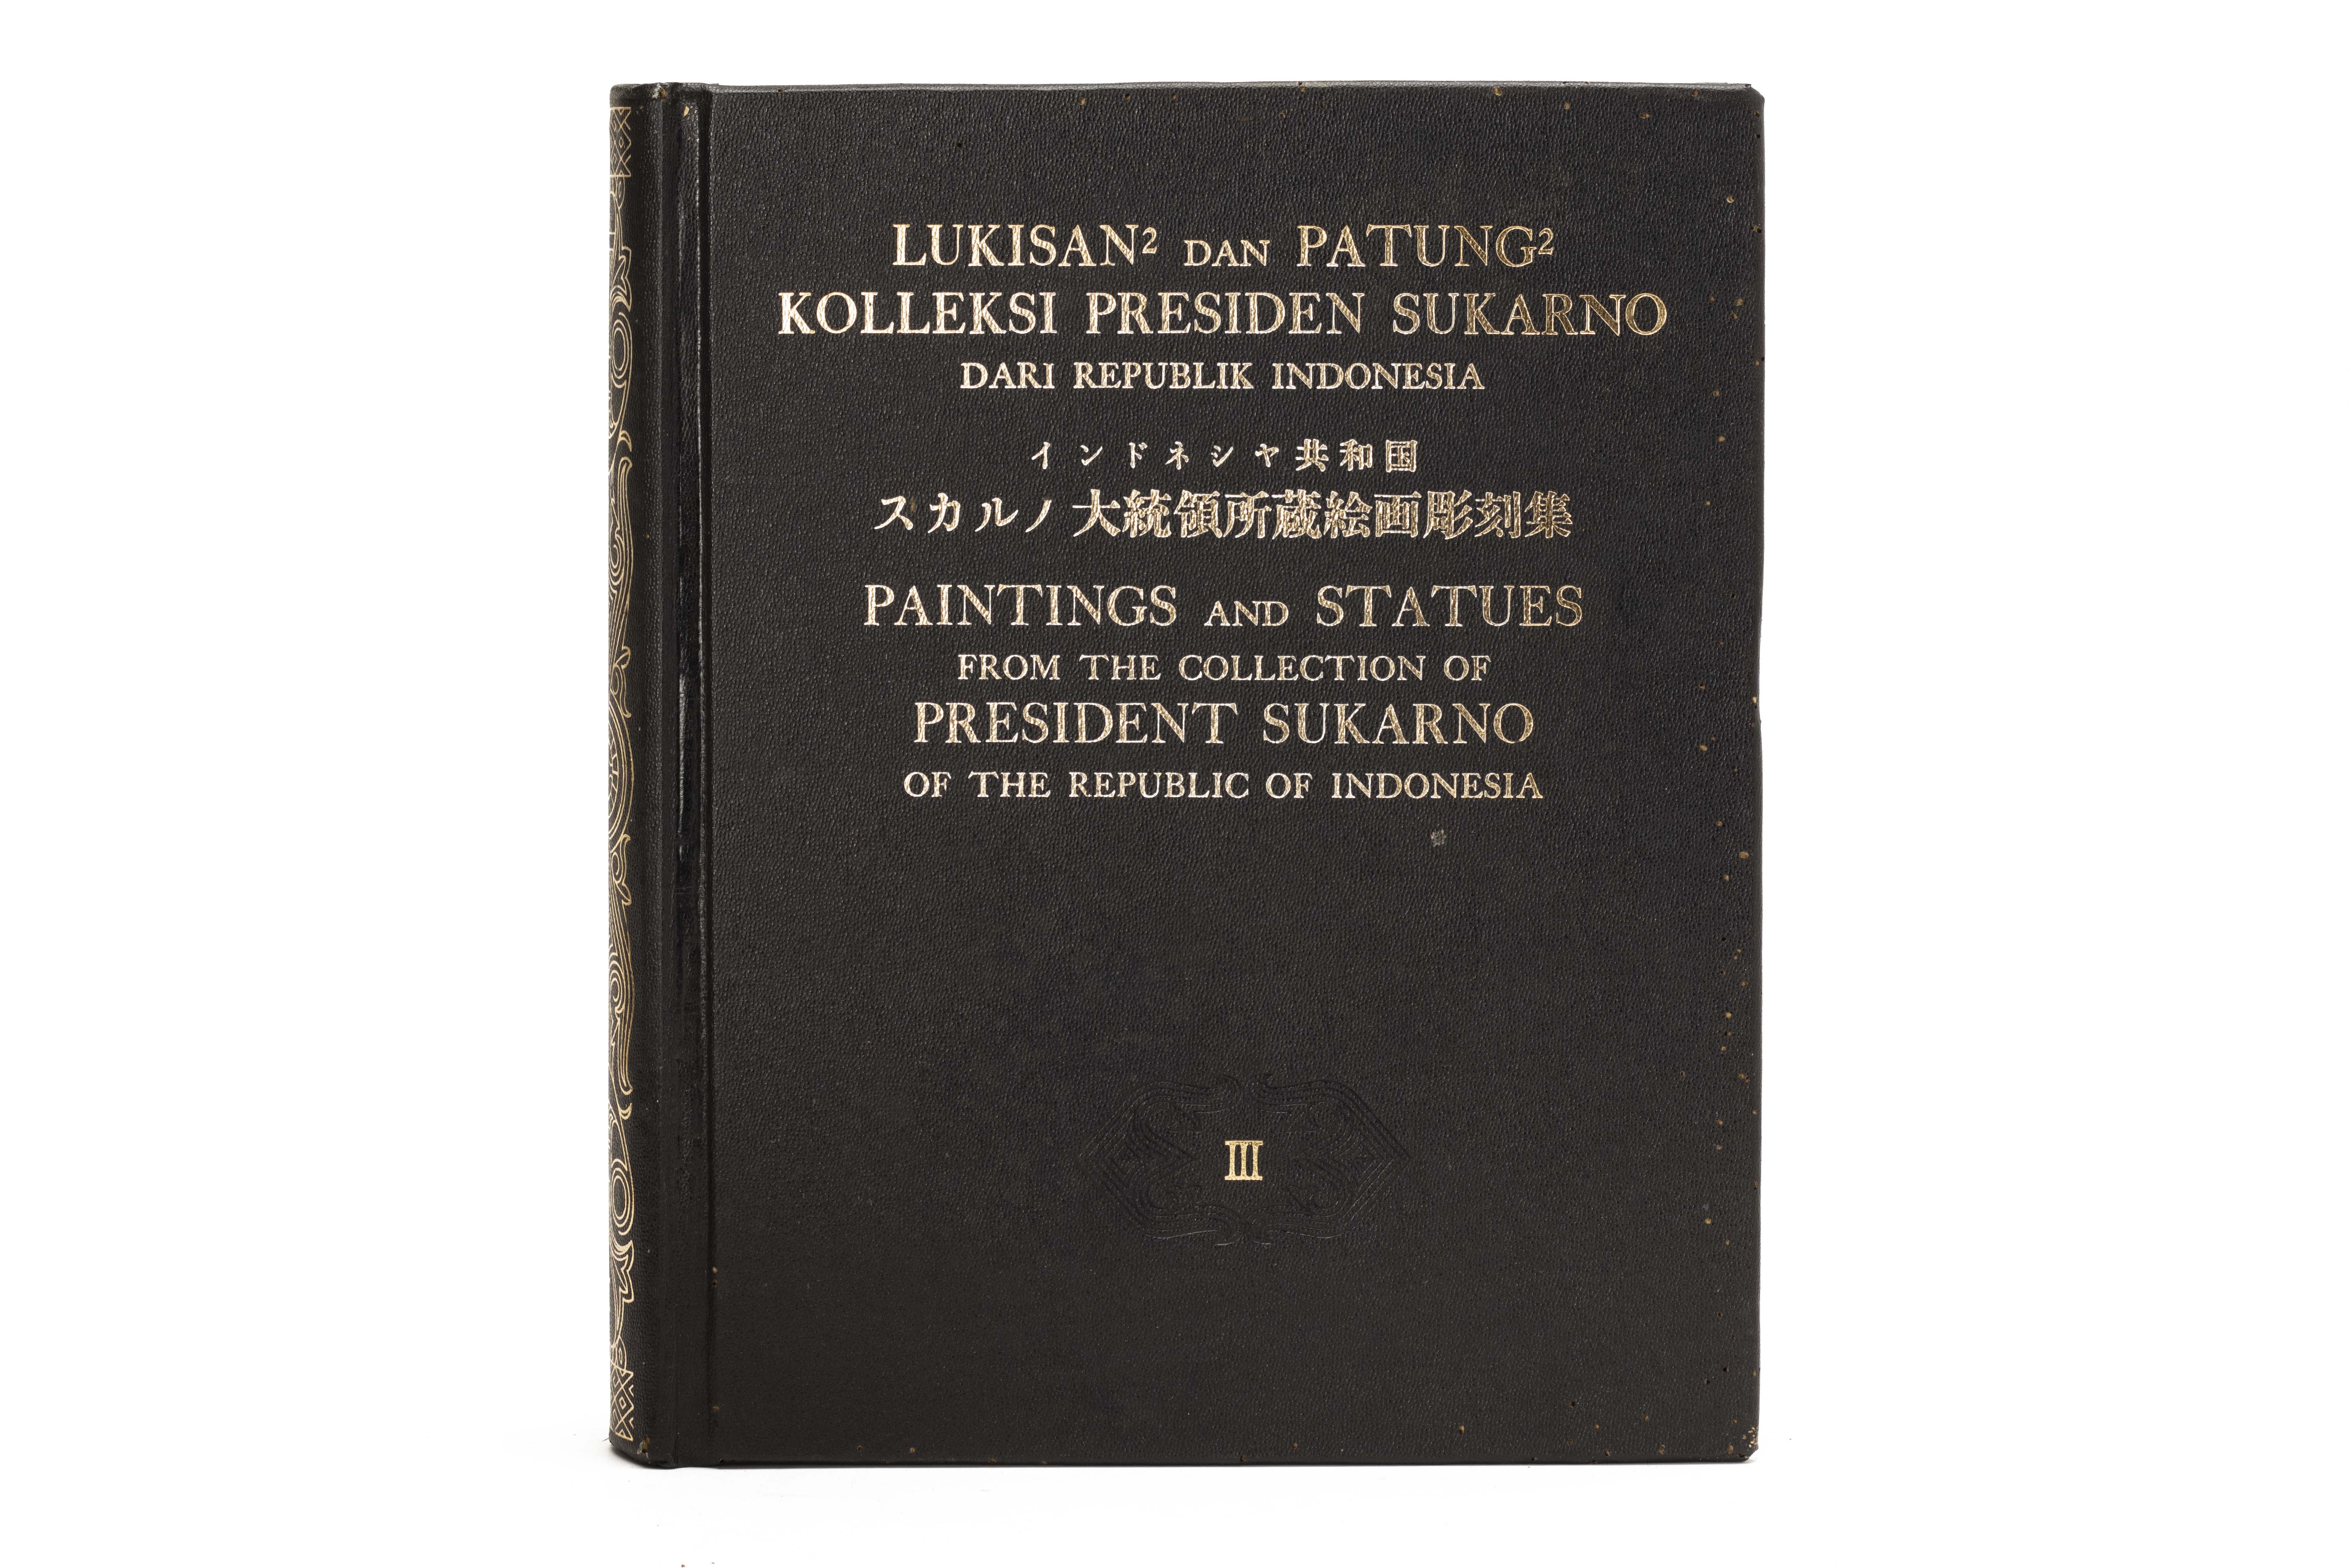 LEE MAN FONG - THE COLLECTION OF PRESIDENT SUKARNO - Image 11 of 15